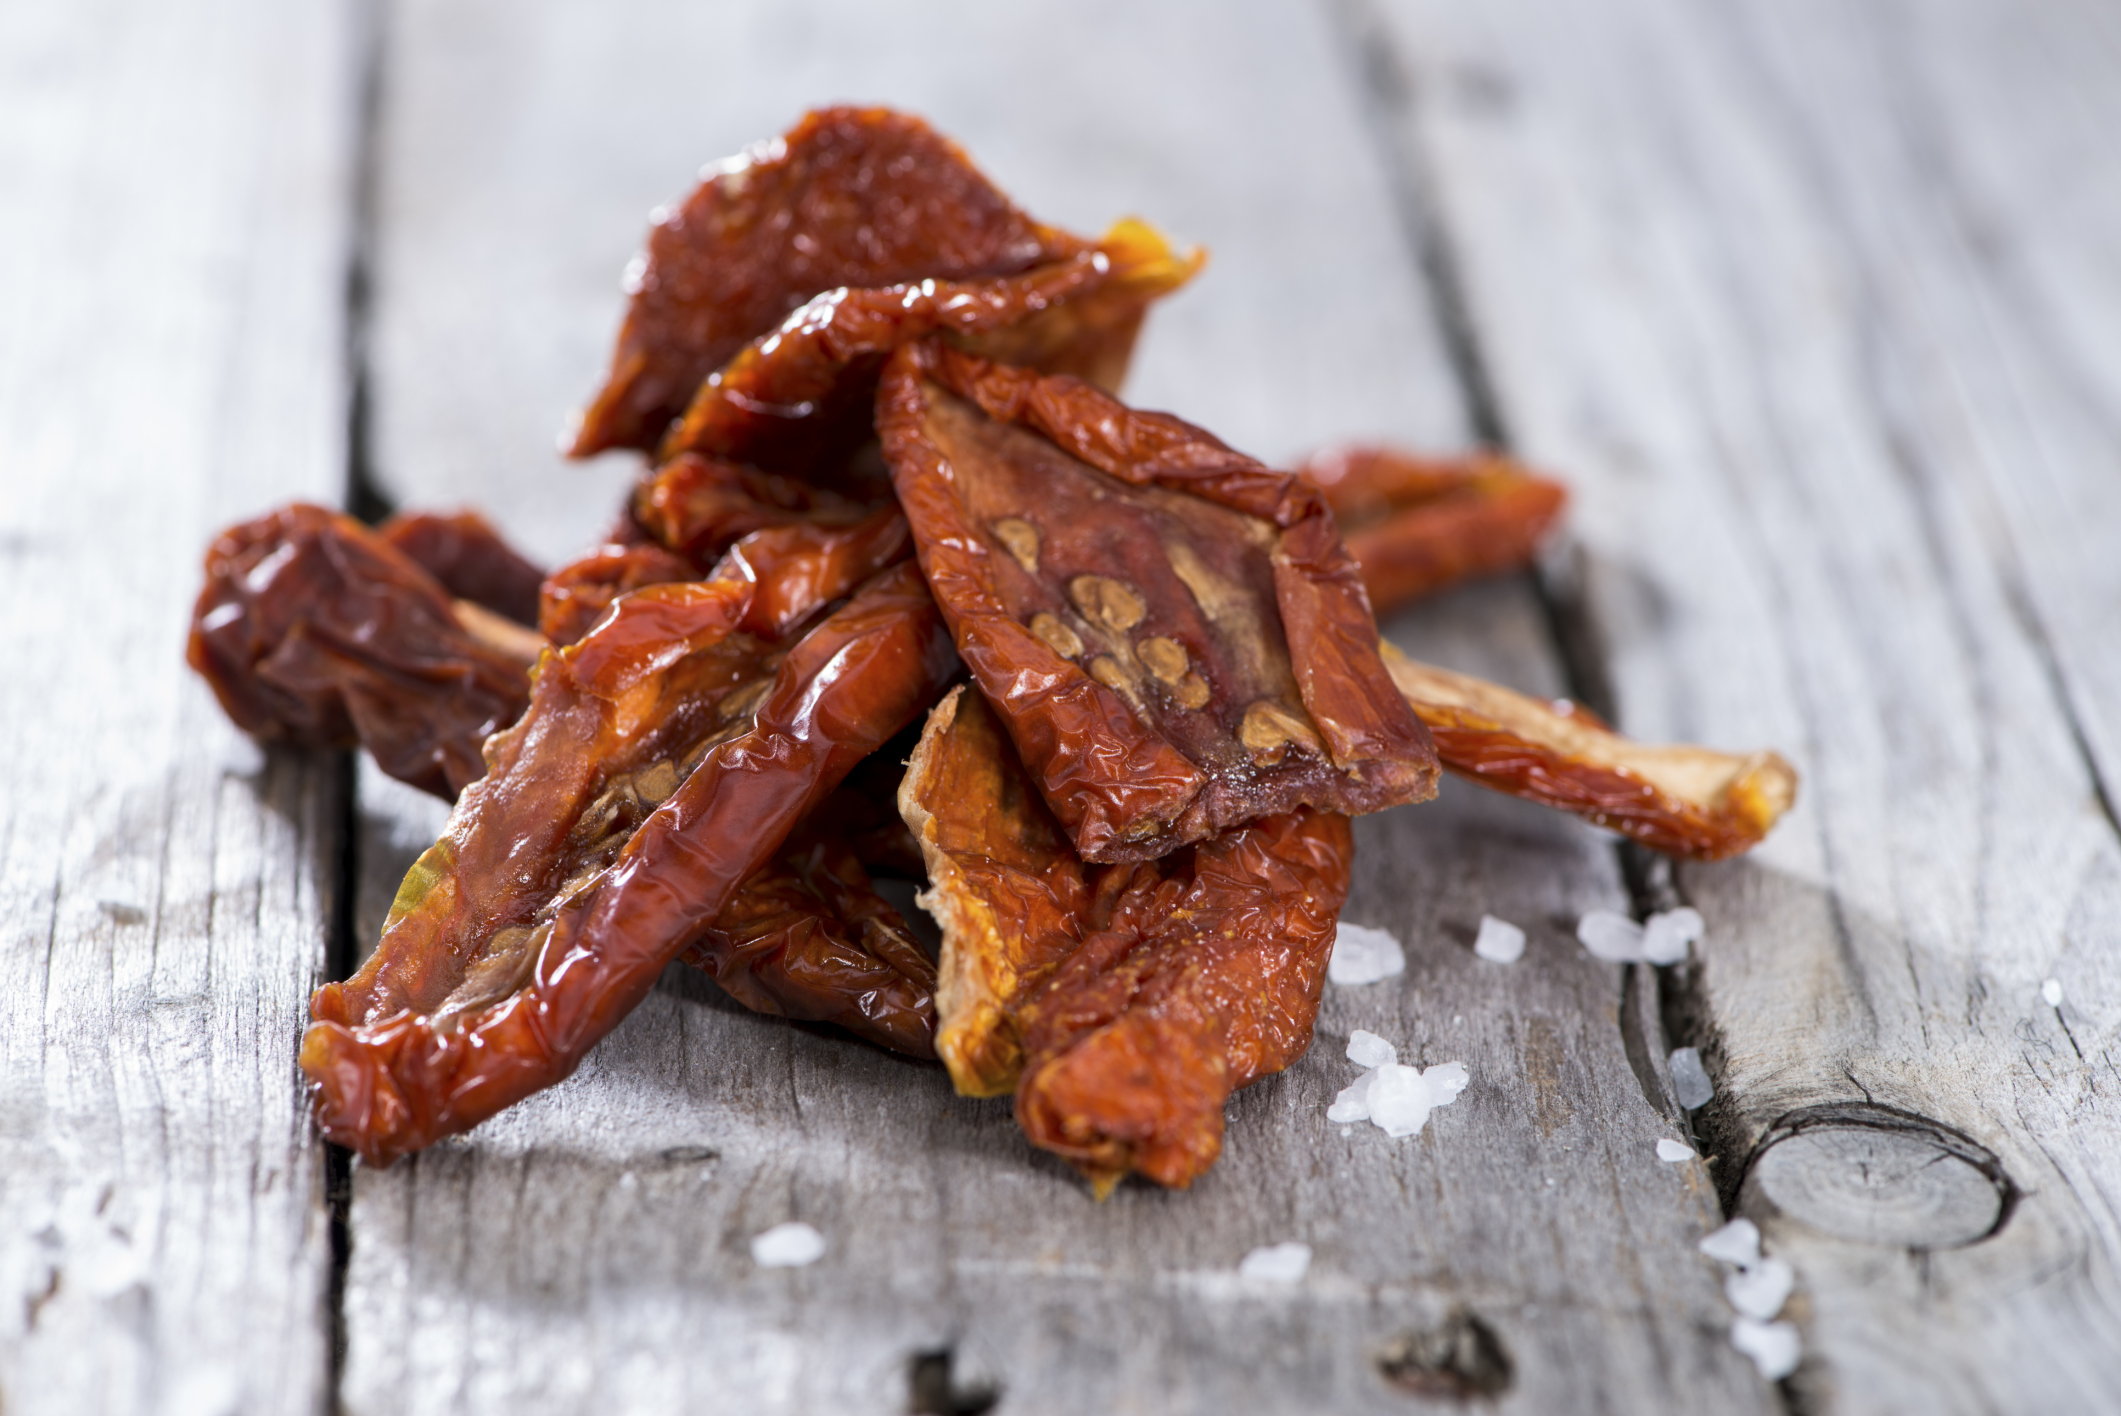 The Nutritional Information of Sun-Dried Tomatoes